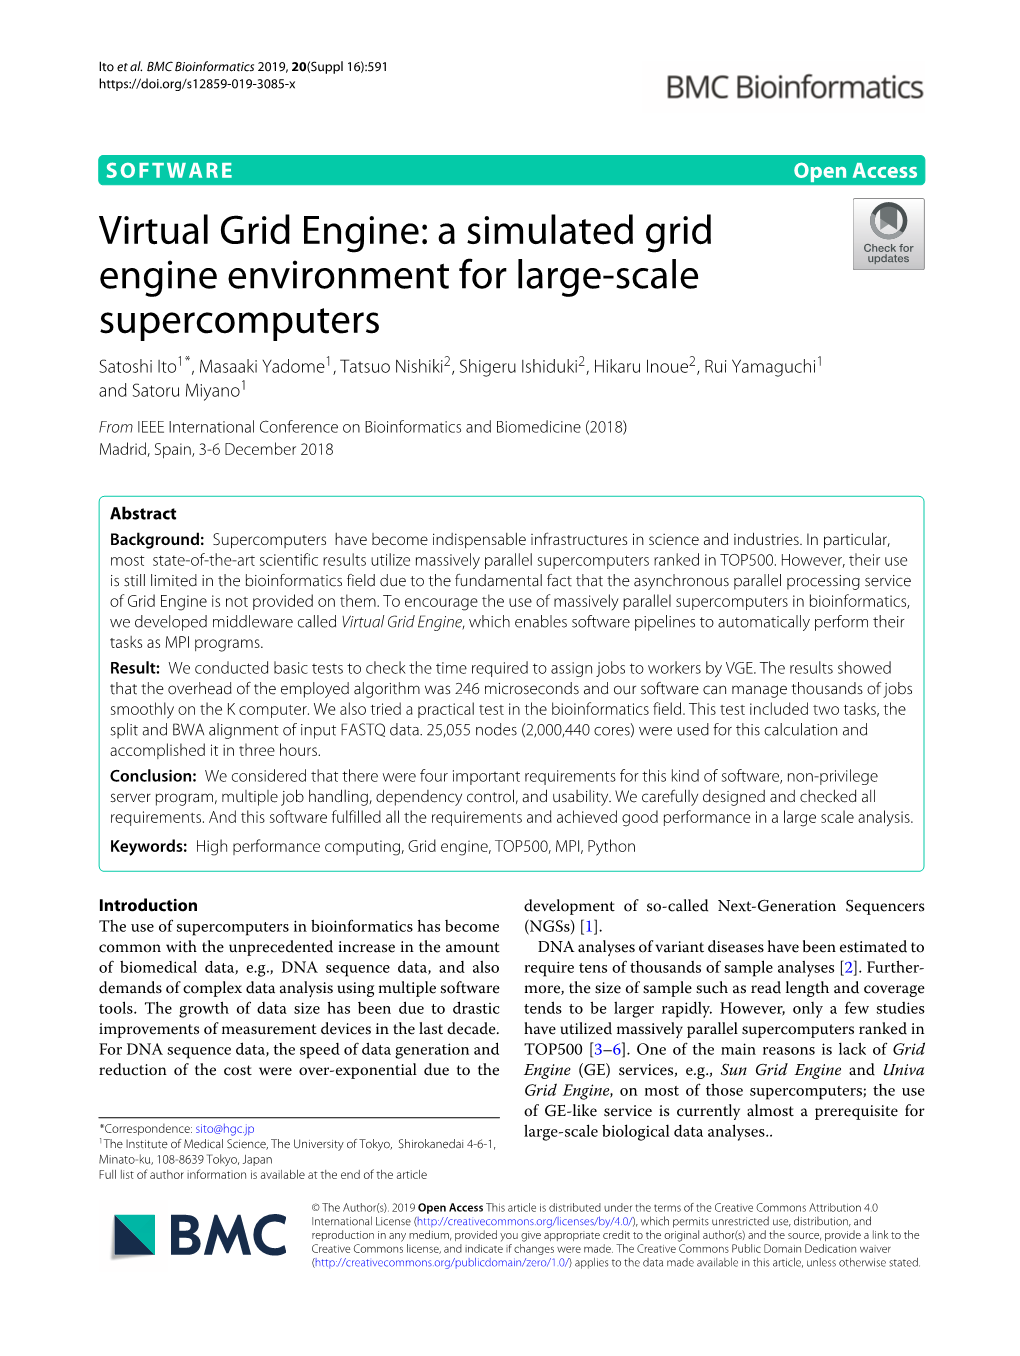 A Simulated Grid Engine Environment for Large-Scale Supercomputers